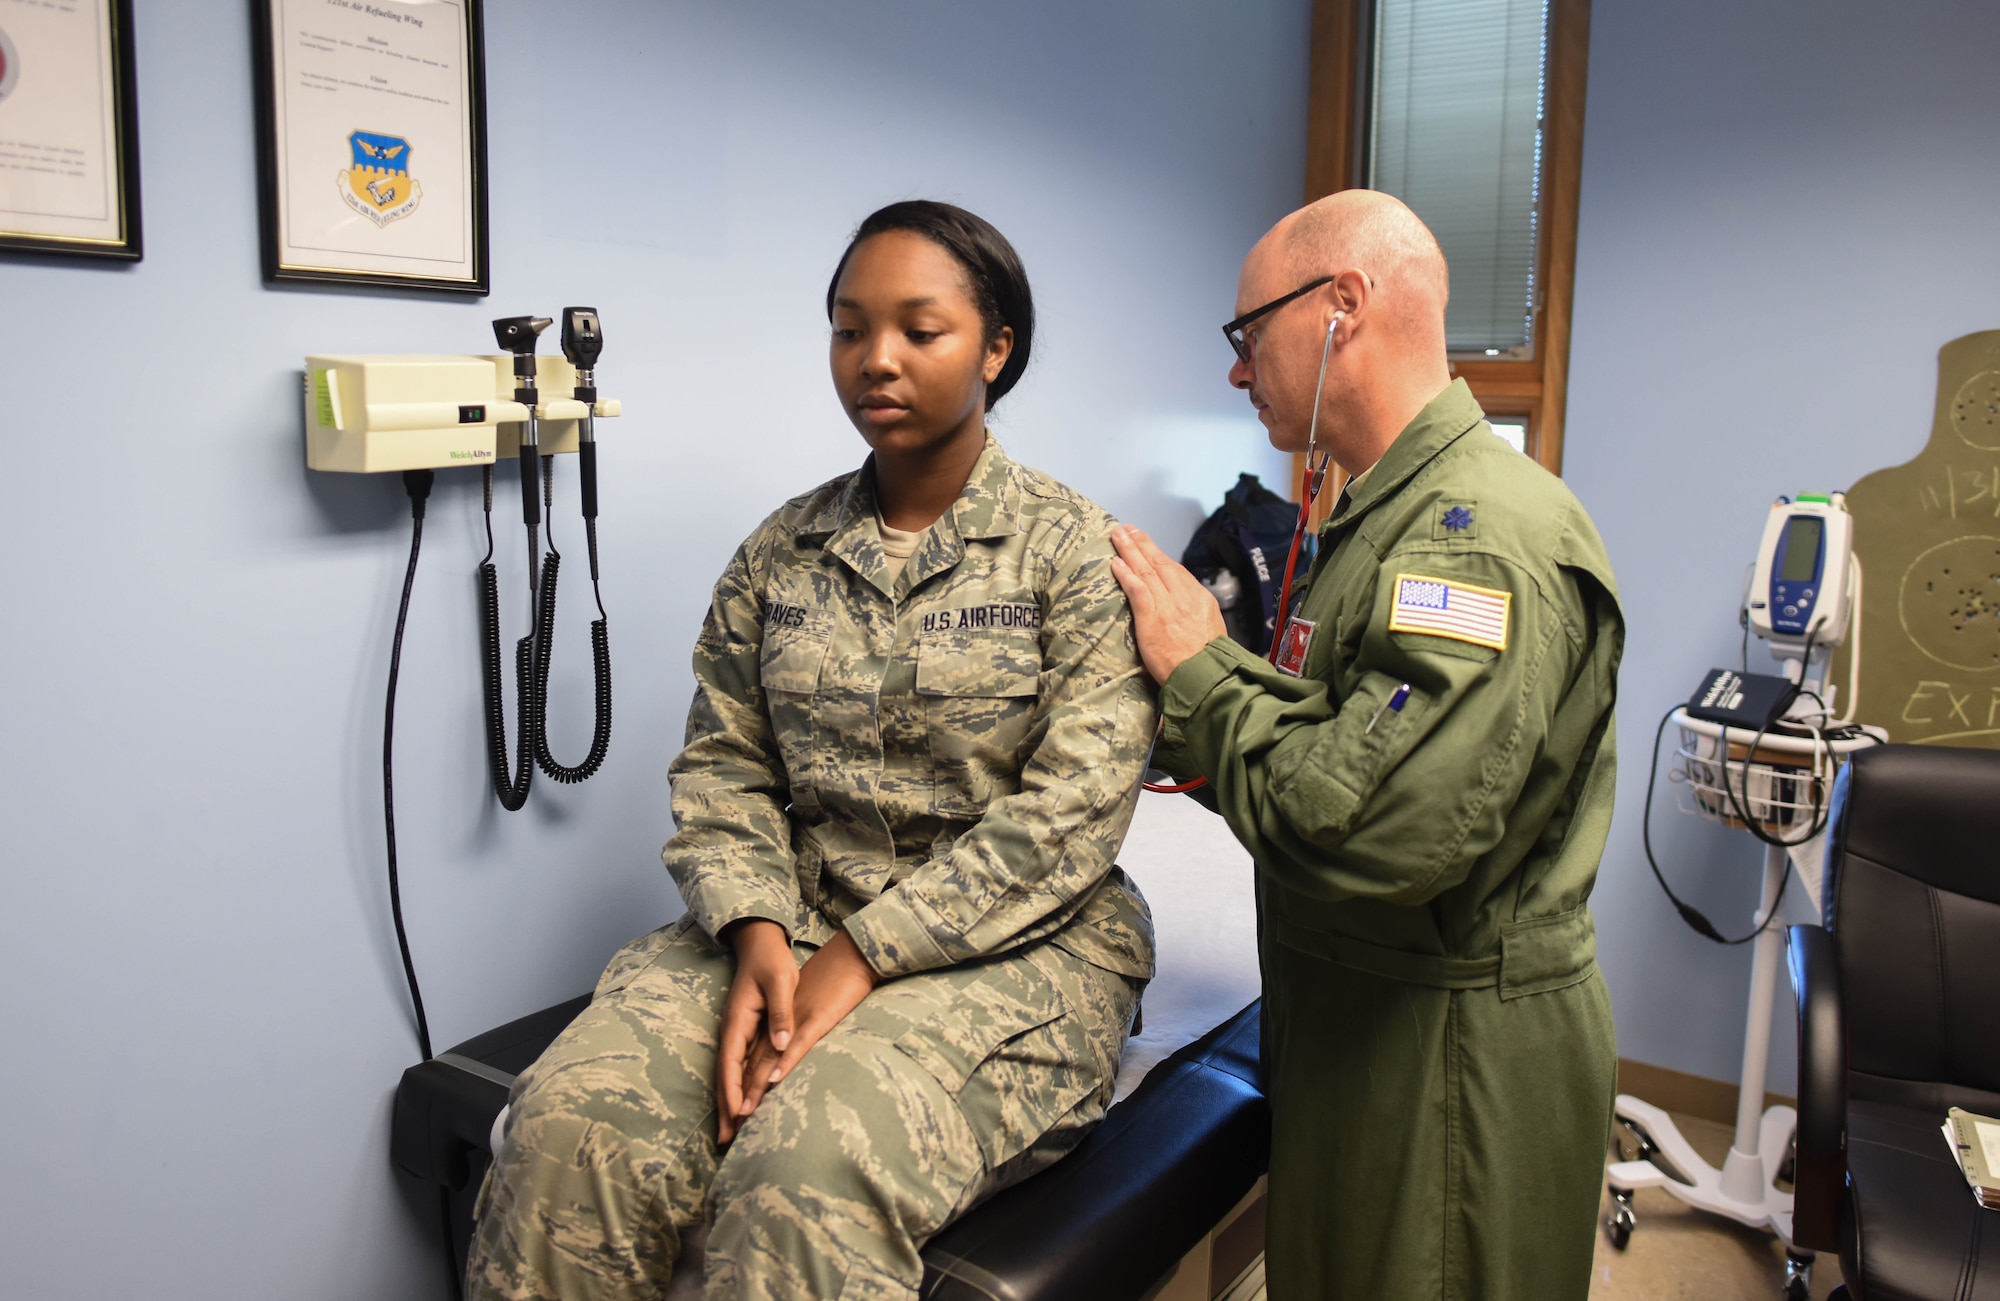 U.S. Air Force Lt. Col. Richard D Pulice, a physician’s assistant with the 121st Medical Group, examines Senior Airman Tiera Graves, with the 121st Force Support Squadron, Aug. 8, 2016 at Rickenbacker Air National Guard Base, Ohio. Pulice was recently awarded the Ohio Health Care Worker of the Year for 2016 for his outstanding work with the Louis Stokes Cleveland VA Medical Center. (U.S. Air National Guard photo by Airman 1st Class Ashley Williams/Released) 